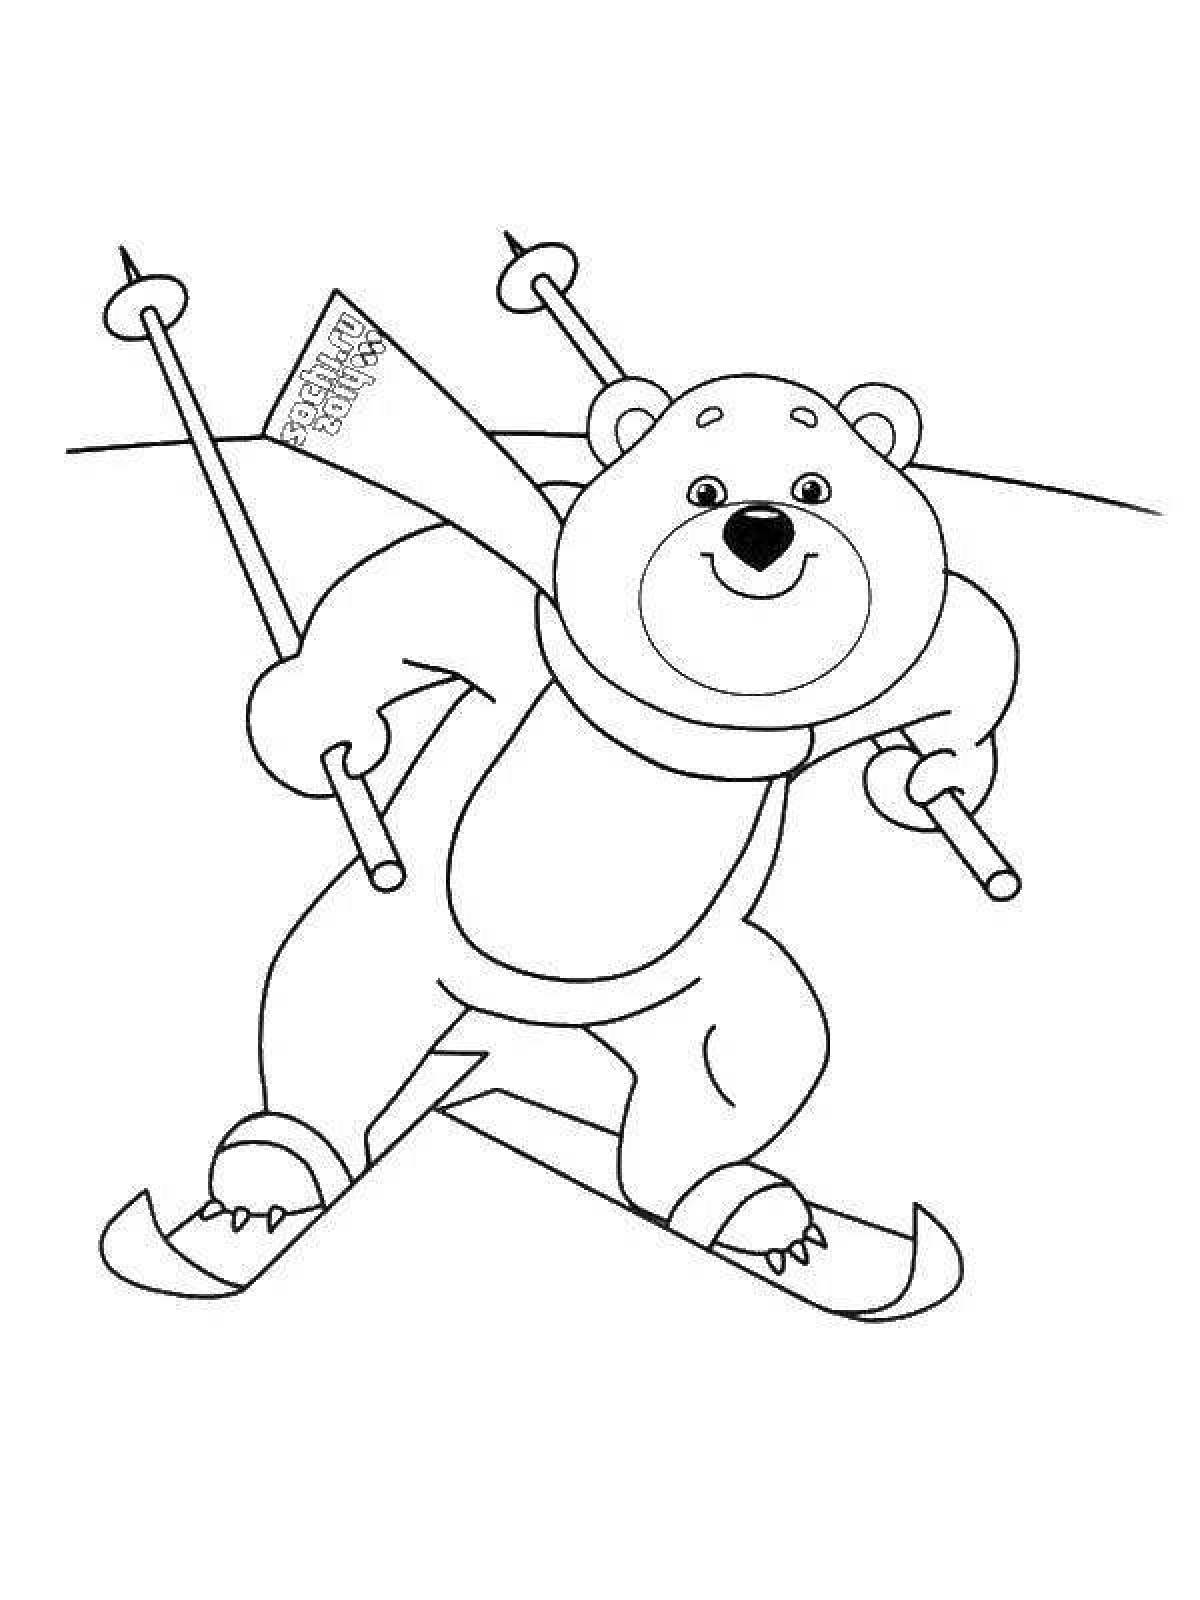 Olympic Bear Animated Coloring Page